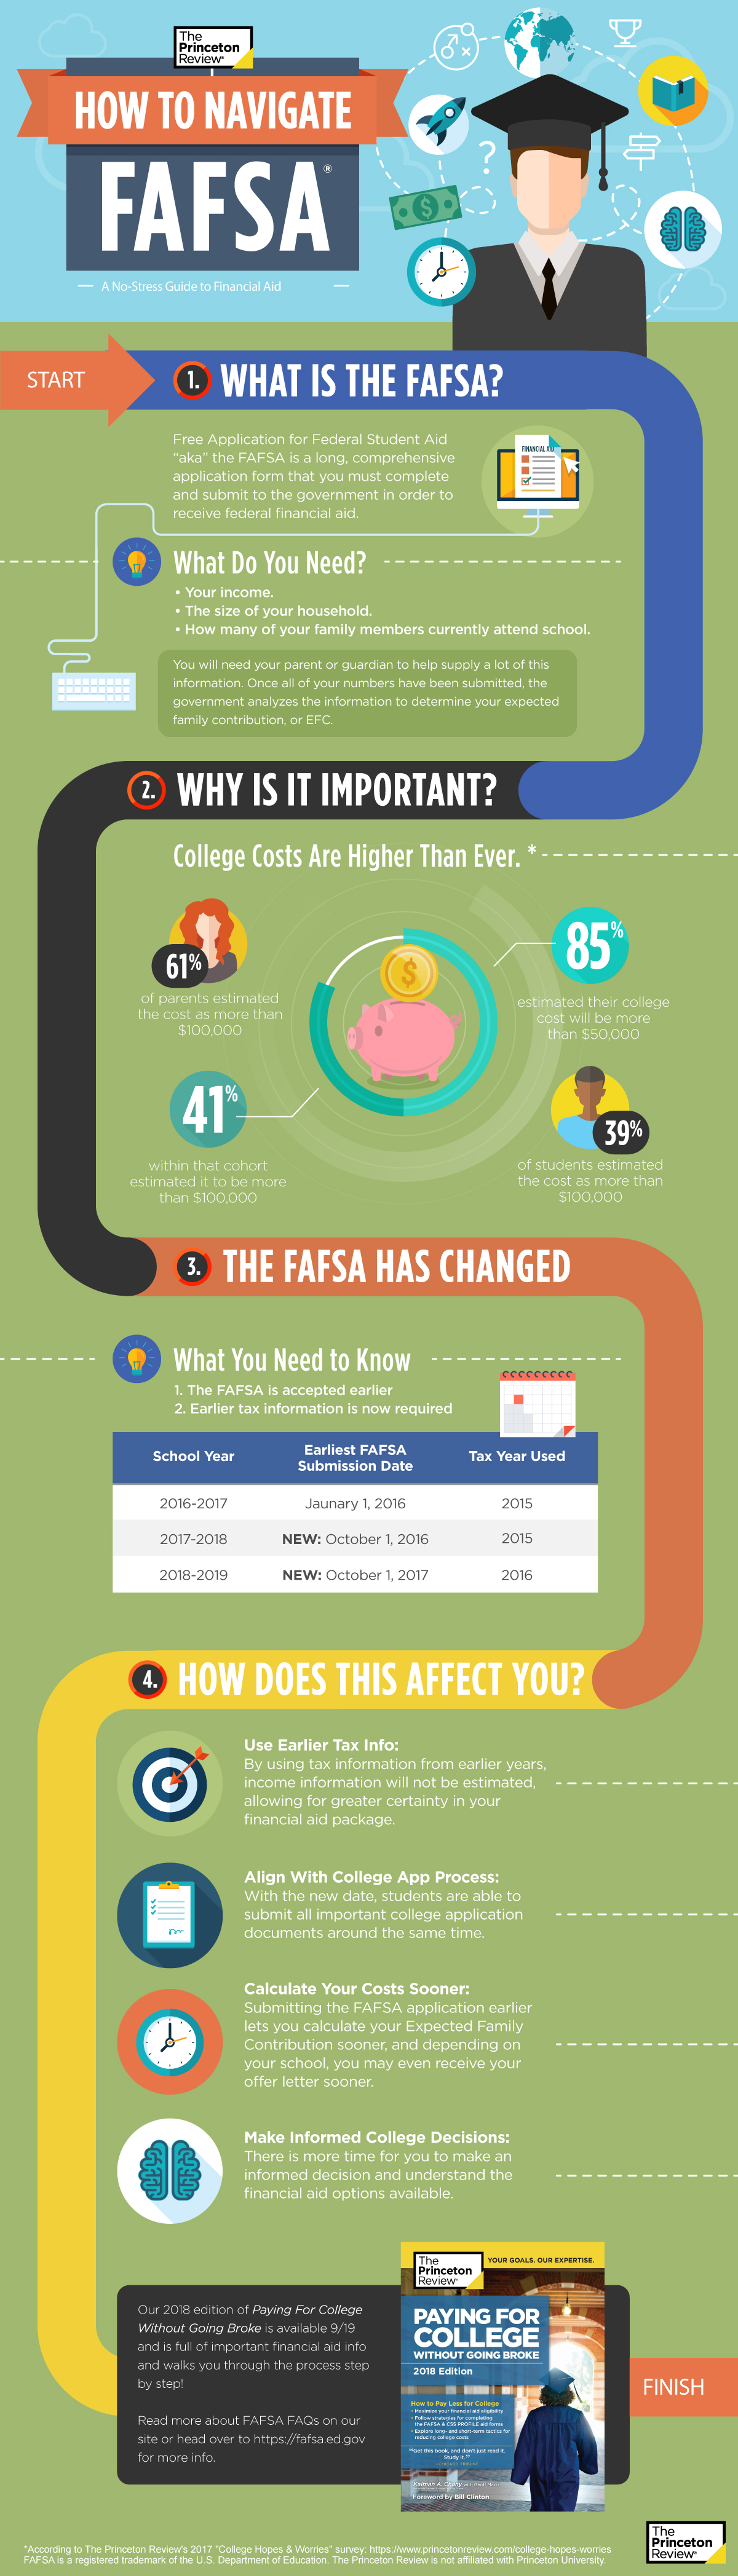 How To Navigate the FAFSA Infographic